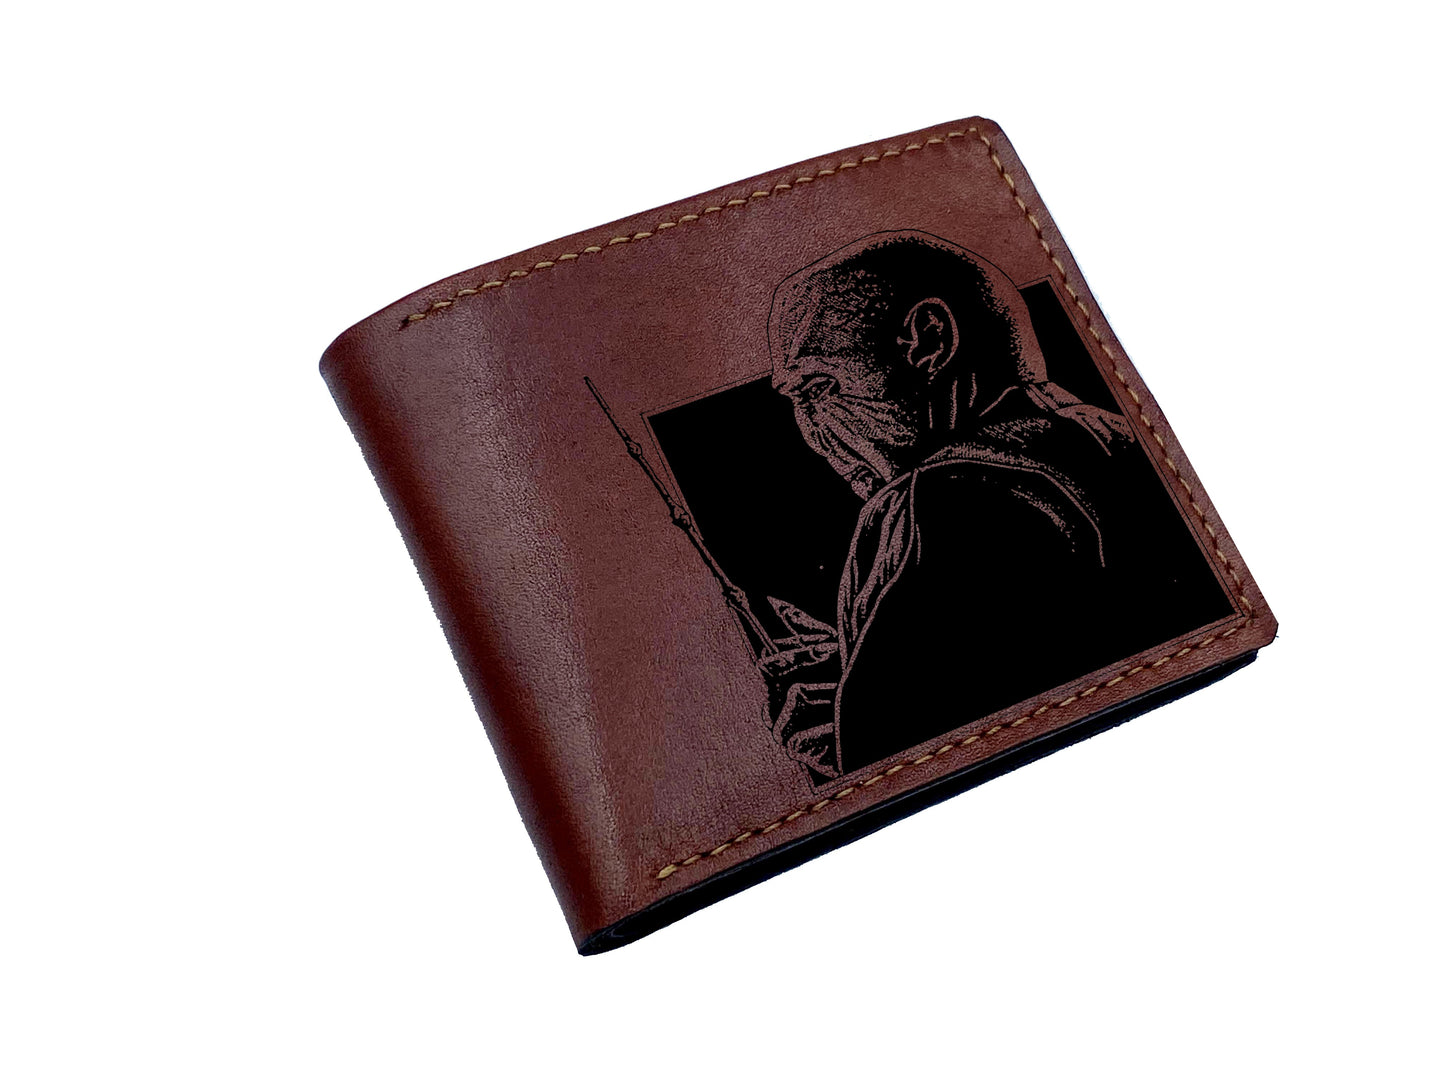 Mayan Corner - Personalized Voldemort the dark Lord wizard leather wallet, Custom Harry Porter leather art gifts, leather birthday present for dad